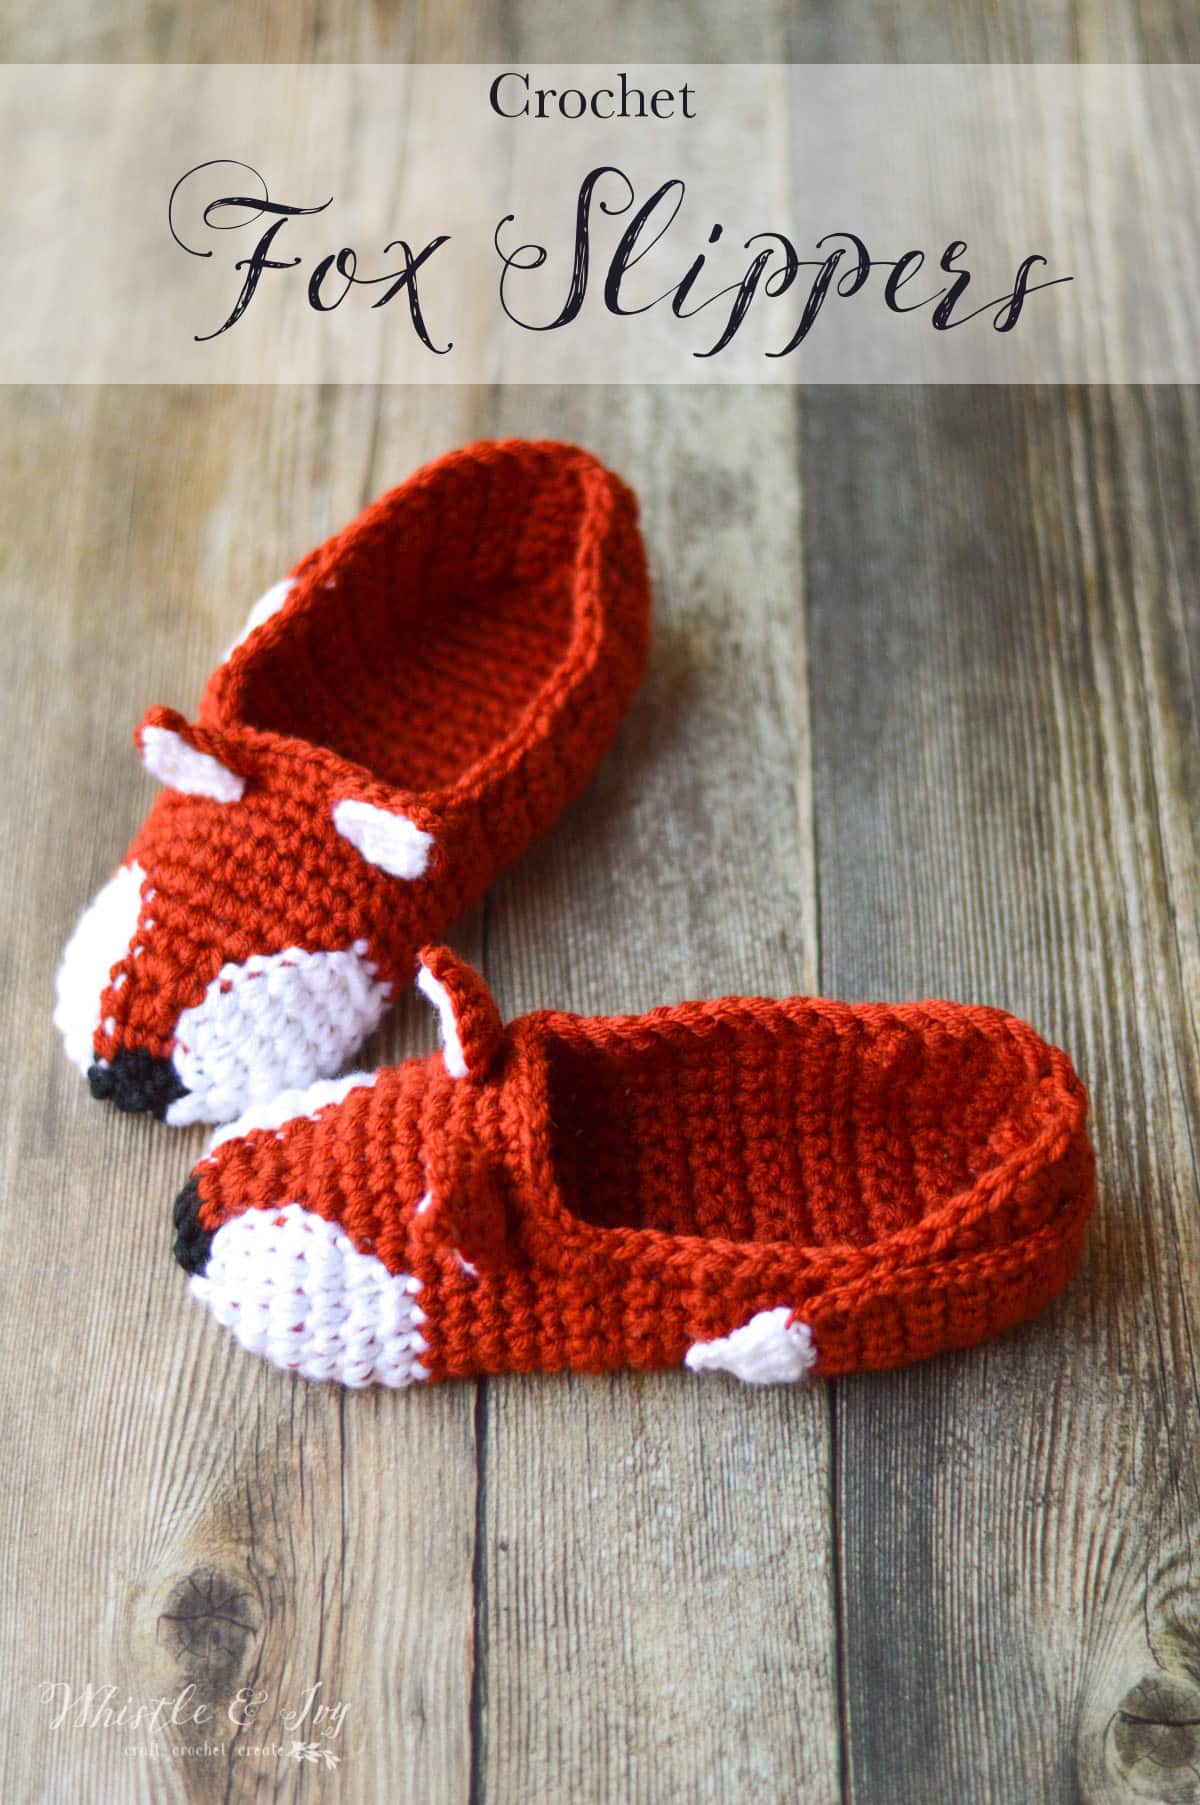 Crochet Fox Slippers - These cute woodland slippers are easy to work up and are make with two strands of yarn, so they are cozy and comfortable. 